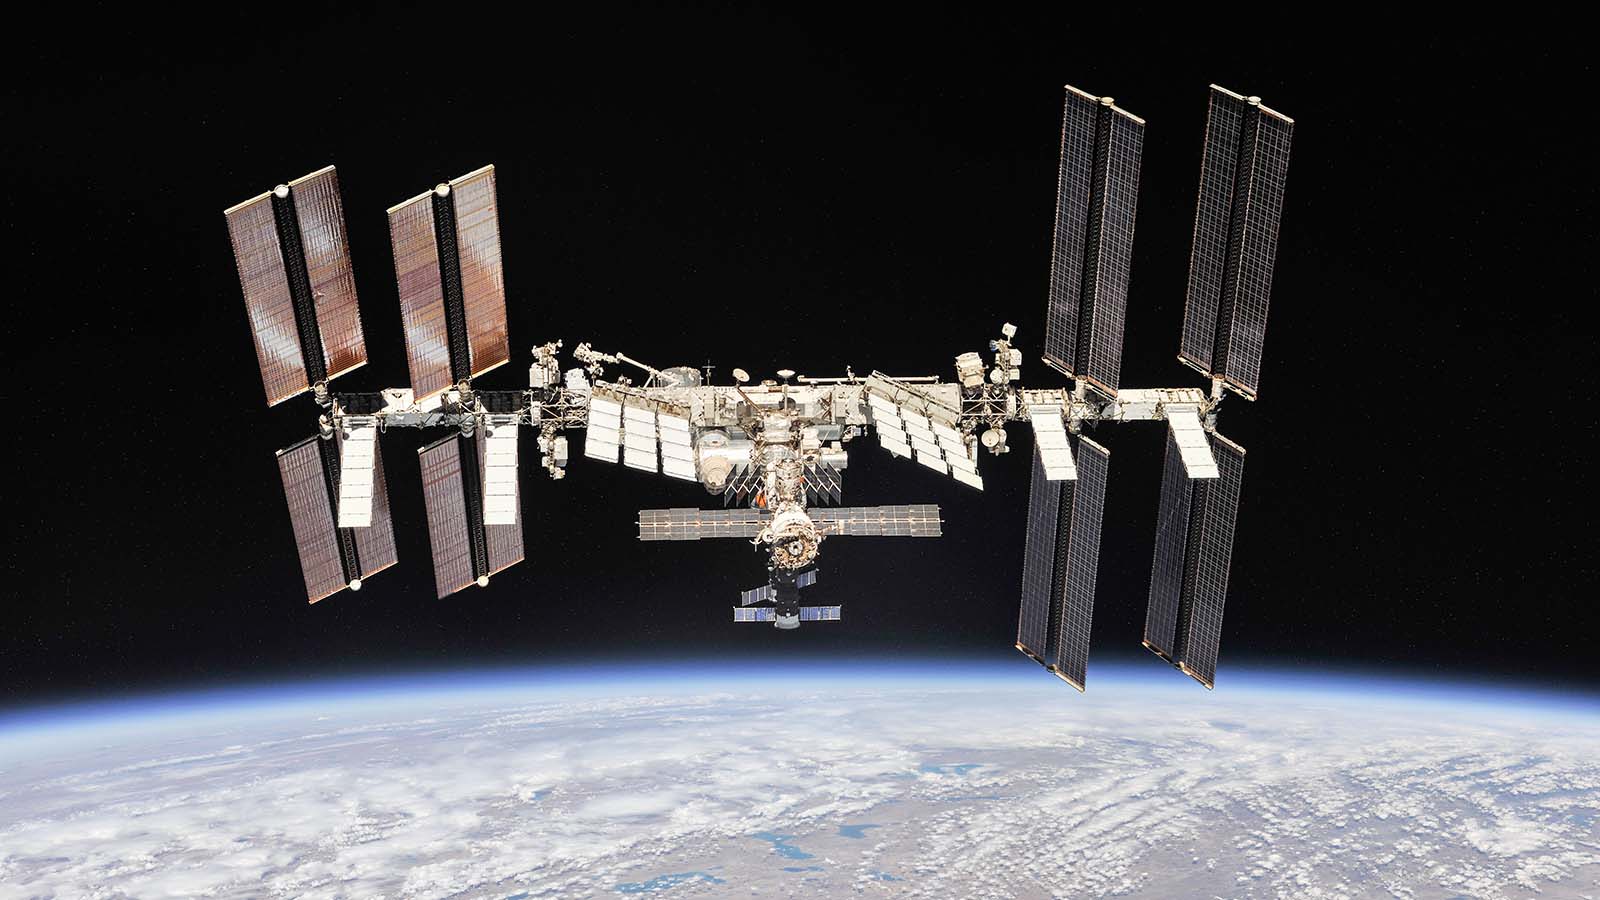 The International Space Station in orbit around Earth